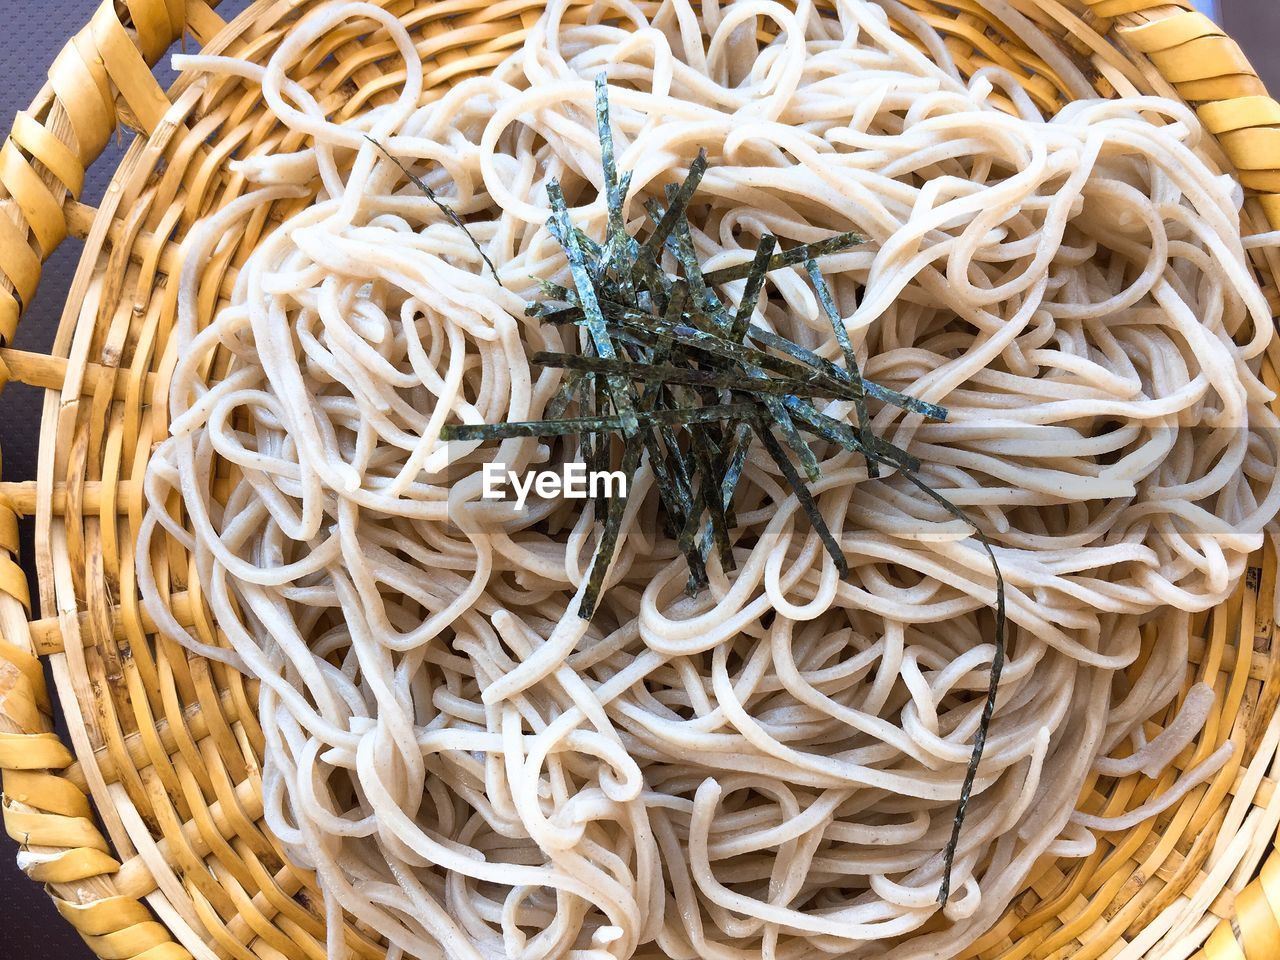 Close up of noodles with seaweed in basket